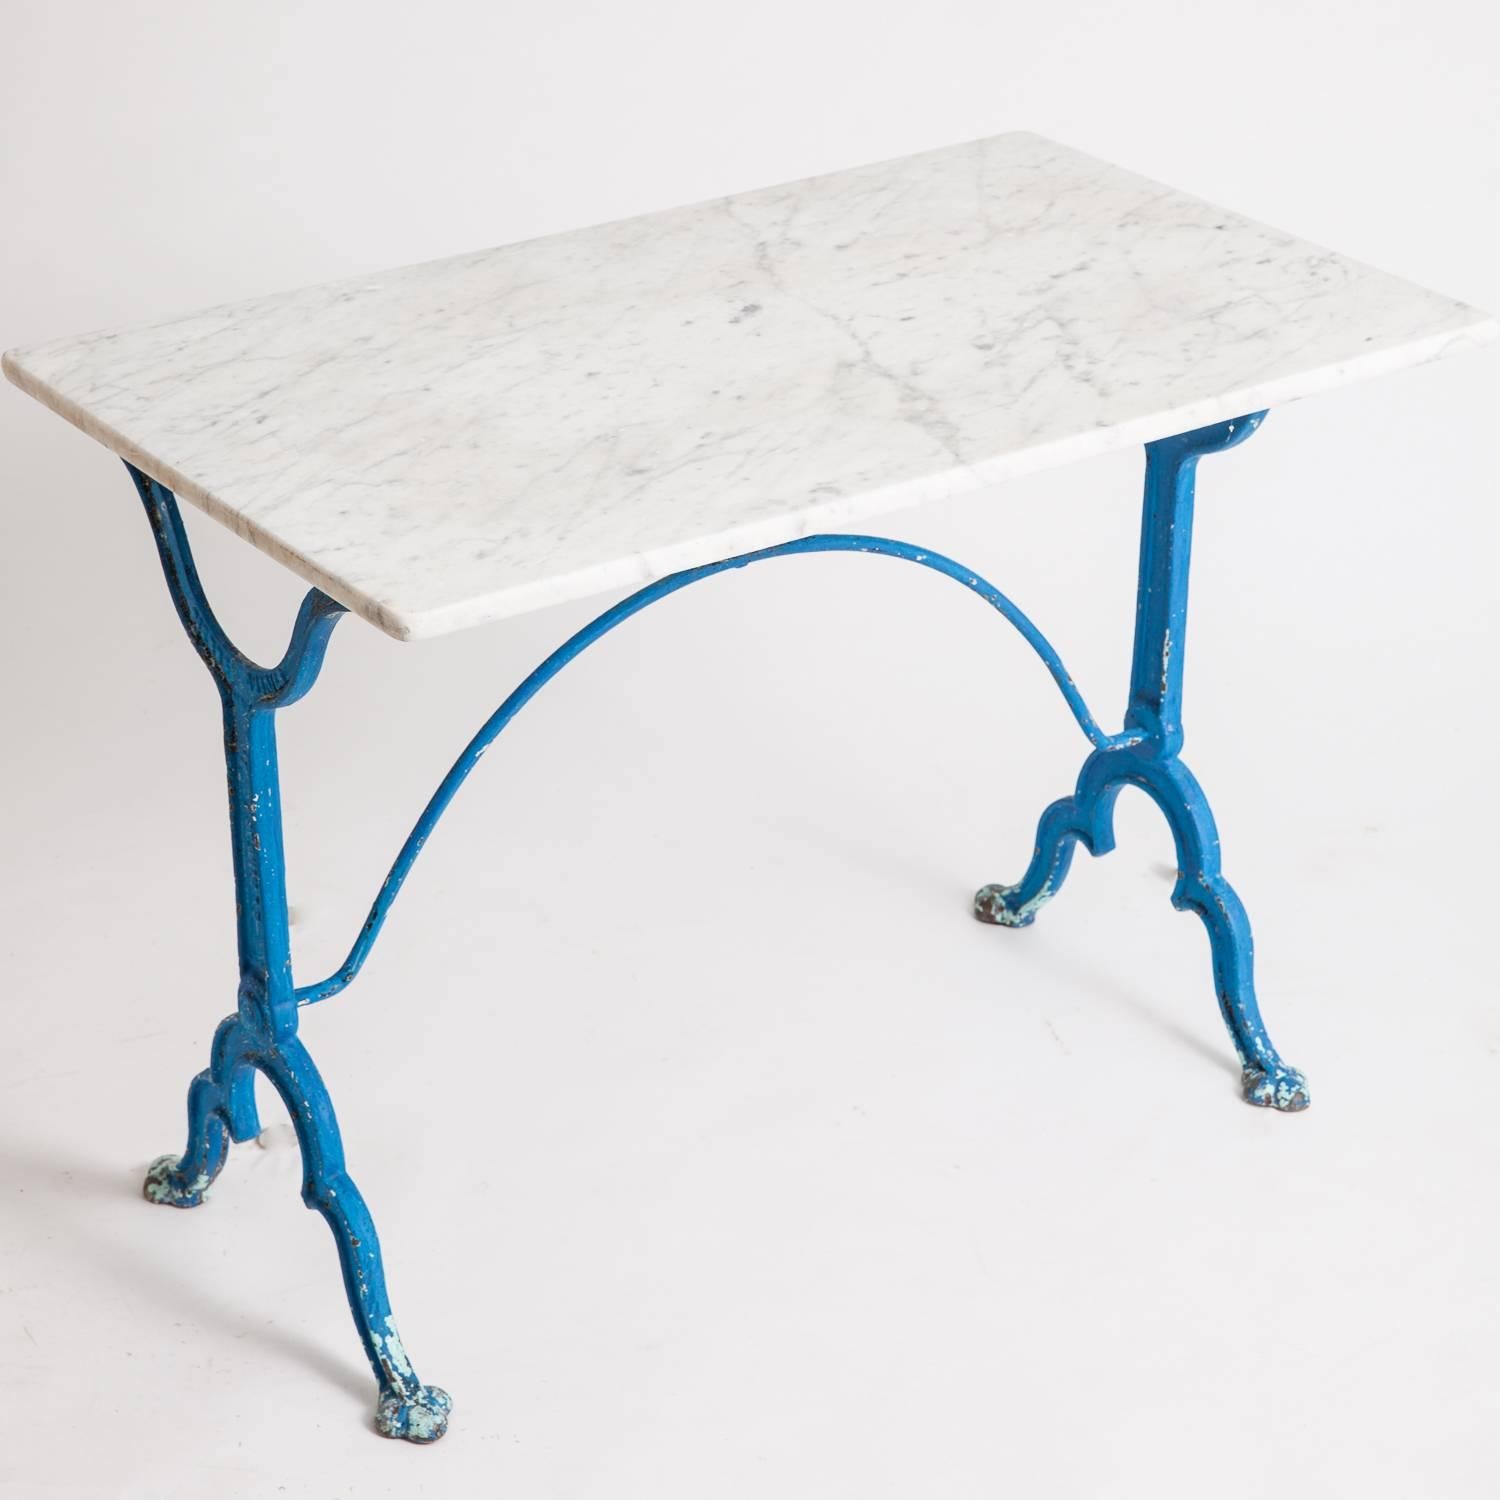 This great cast iron bistro table is marked Pierre Ouvrier, E. Ringlet, Paris. It has traces of wonderful blue paint and a good sized marble-top which is in perfect condition. It dates to circa 1900.